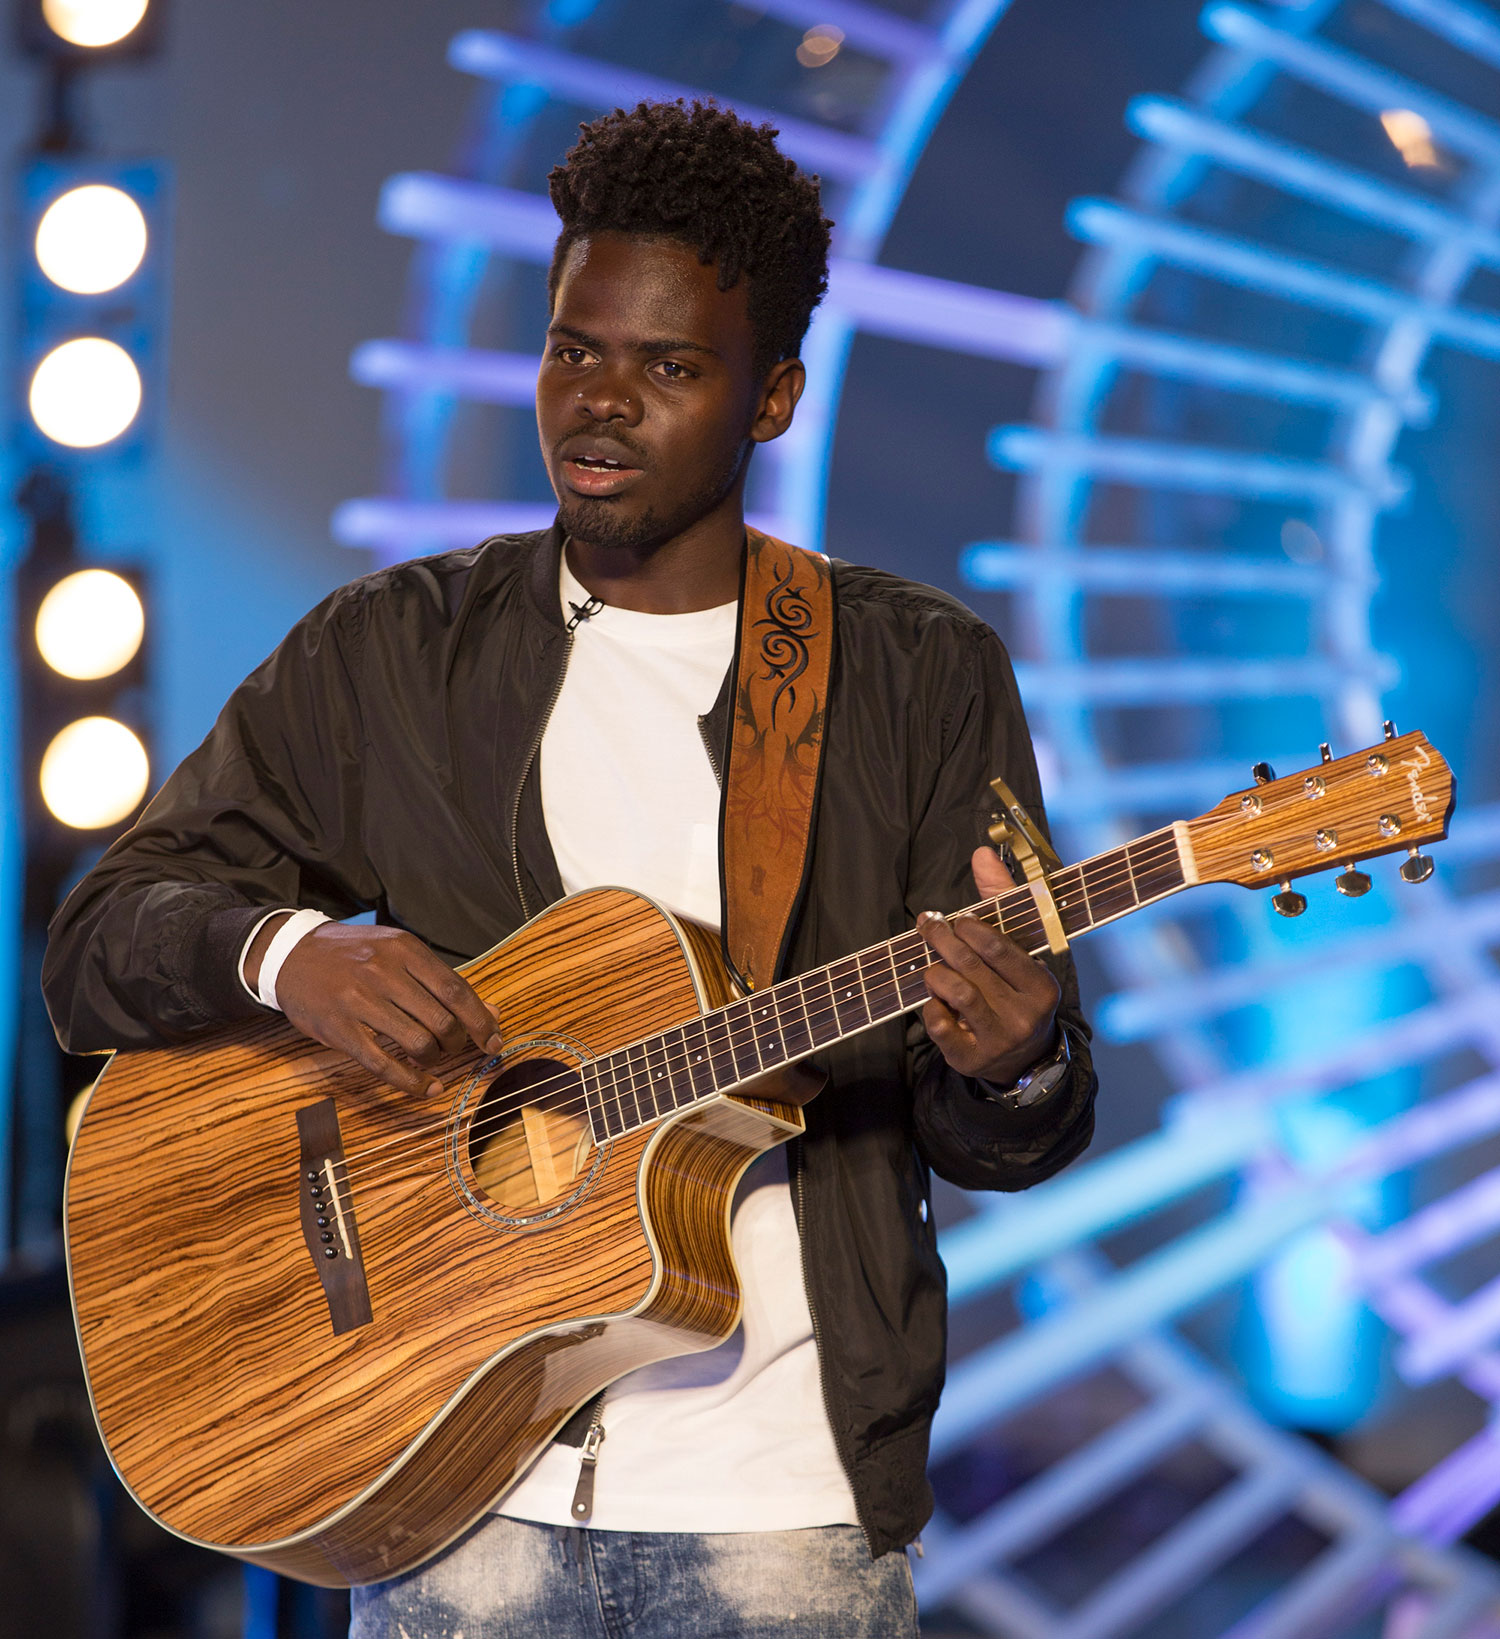 Ron Bultongez performing for the judges on "American Idol" in 2018 // photo Eric Liebowitz/ABC